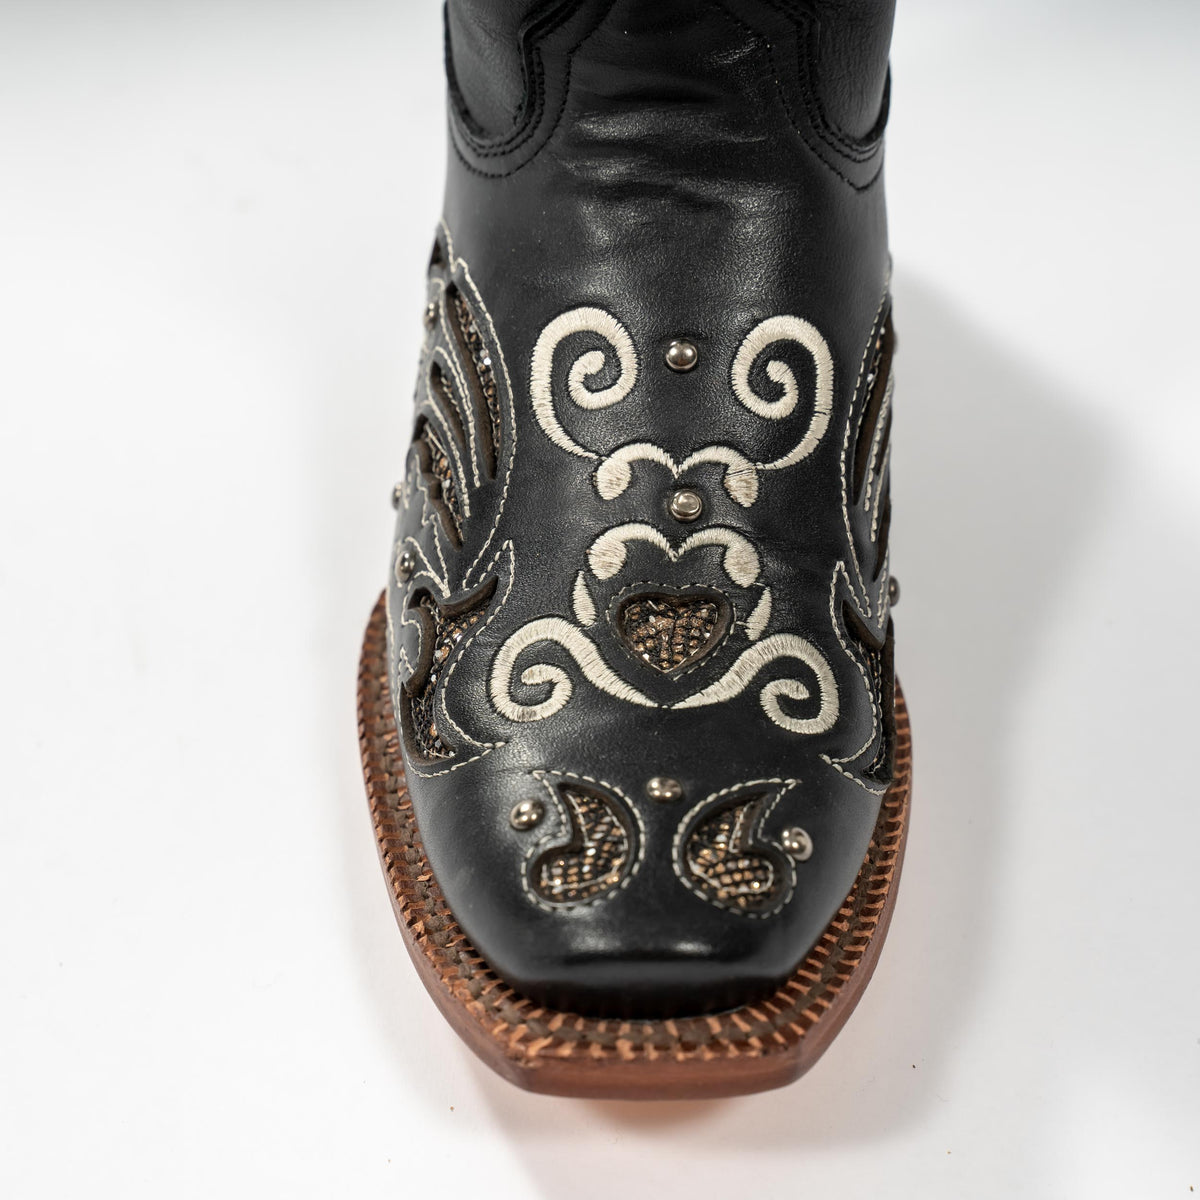 Tanner Mark Boot Venice Black, midnight black  with silver shimmer inlay